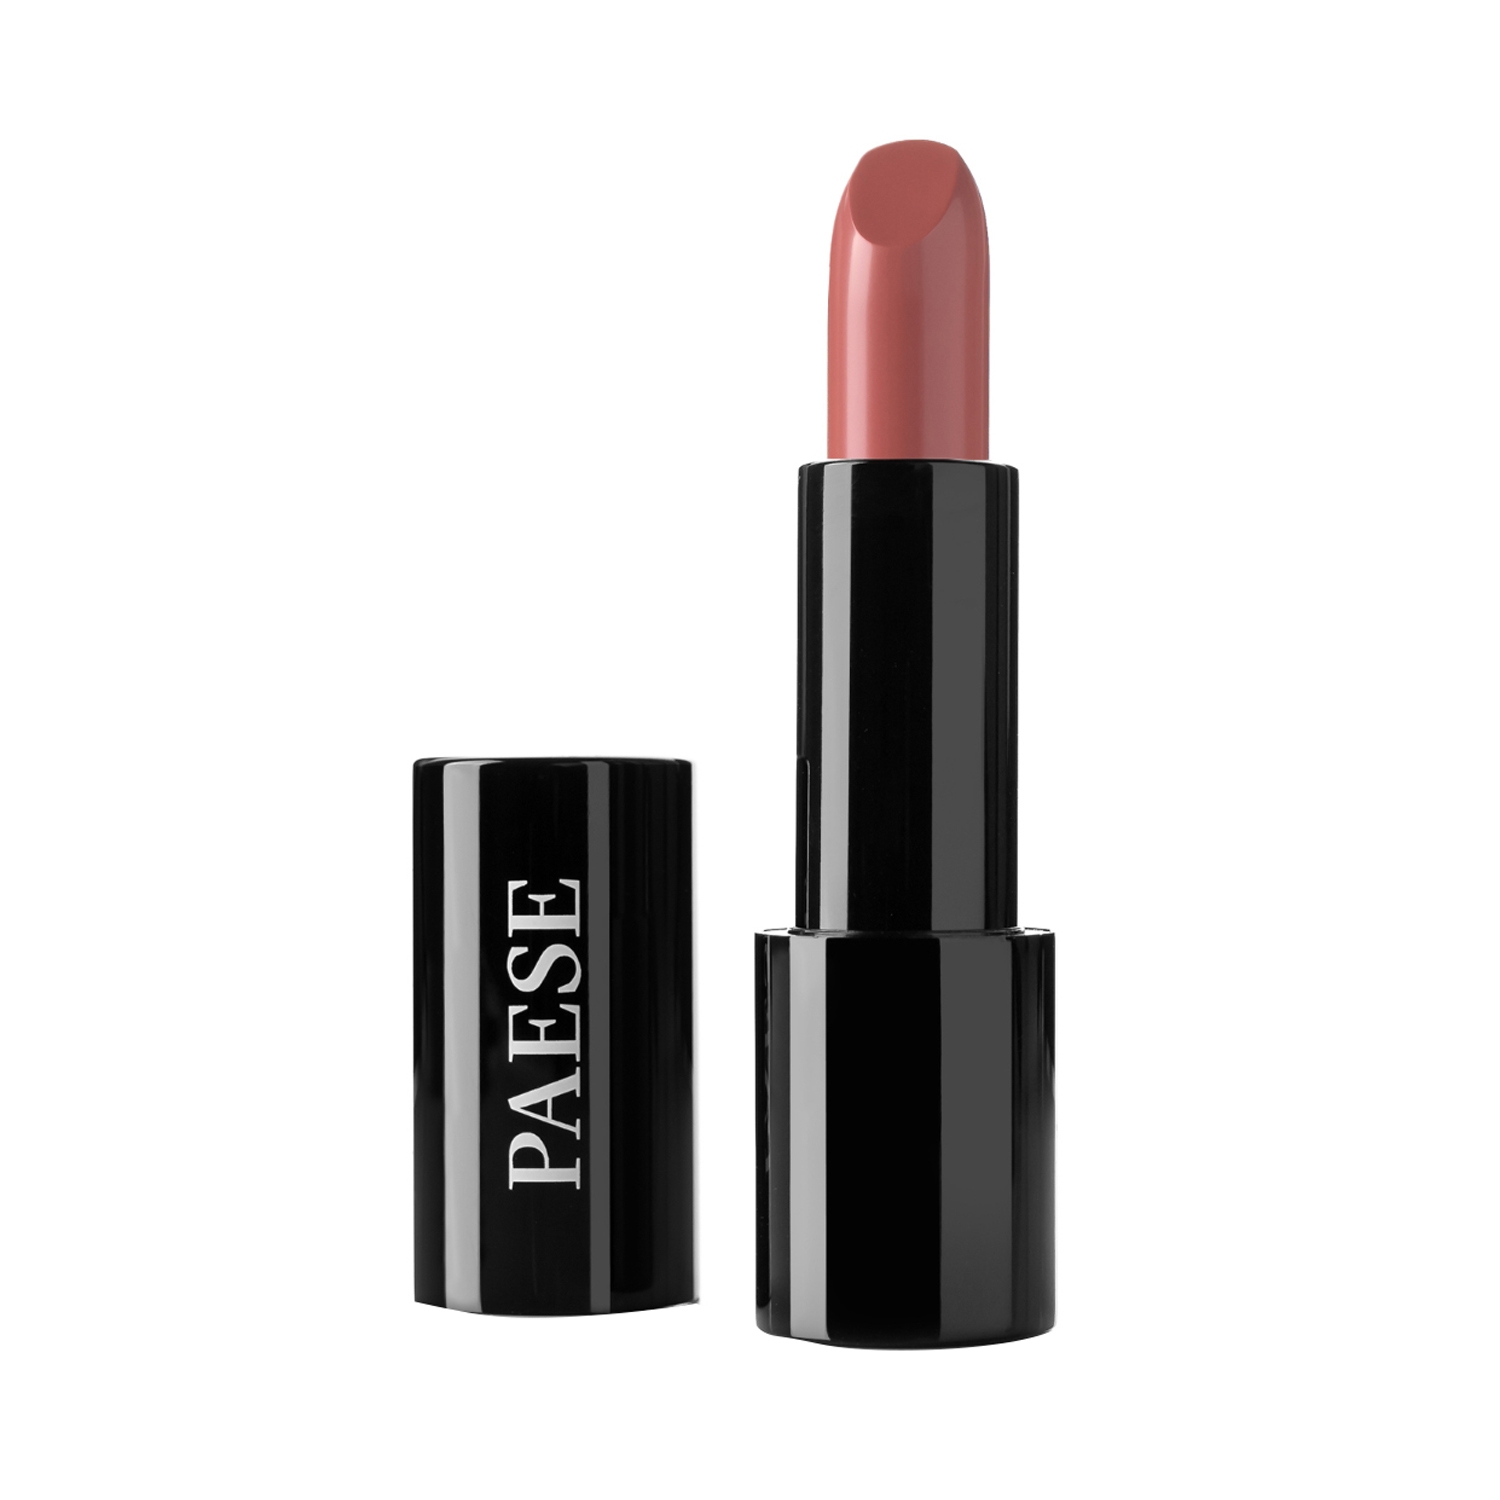 Paese Cosmetics | Paese Cosmetics Lipstick with Argan Oil - 76 Brown (4.3g)